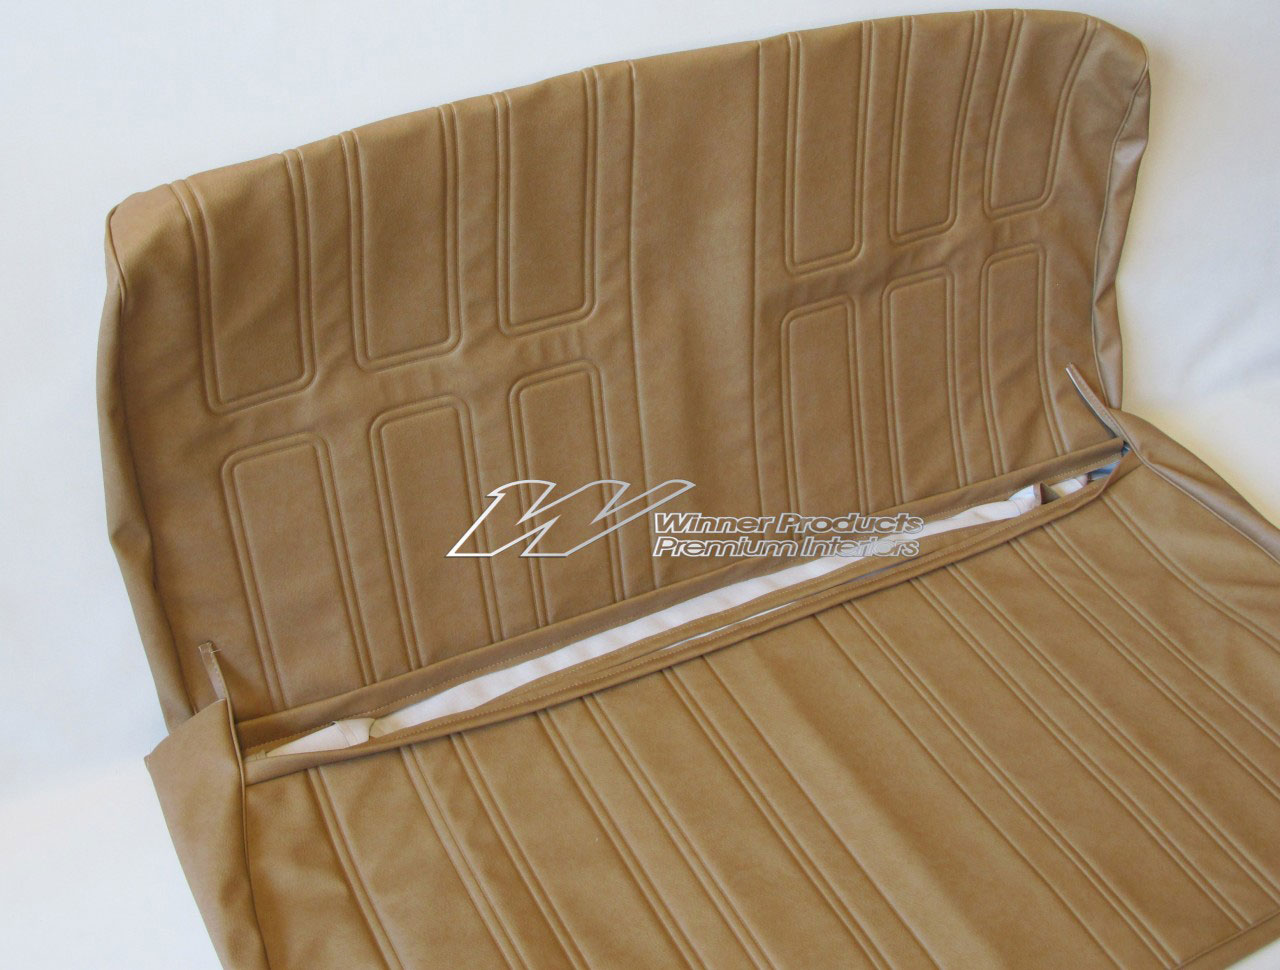 Holden Belmont HQ Belmont Sedan 11A Saddle Seat Covers (Image 1 of 6)